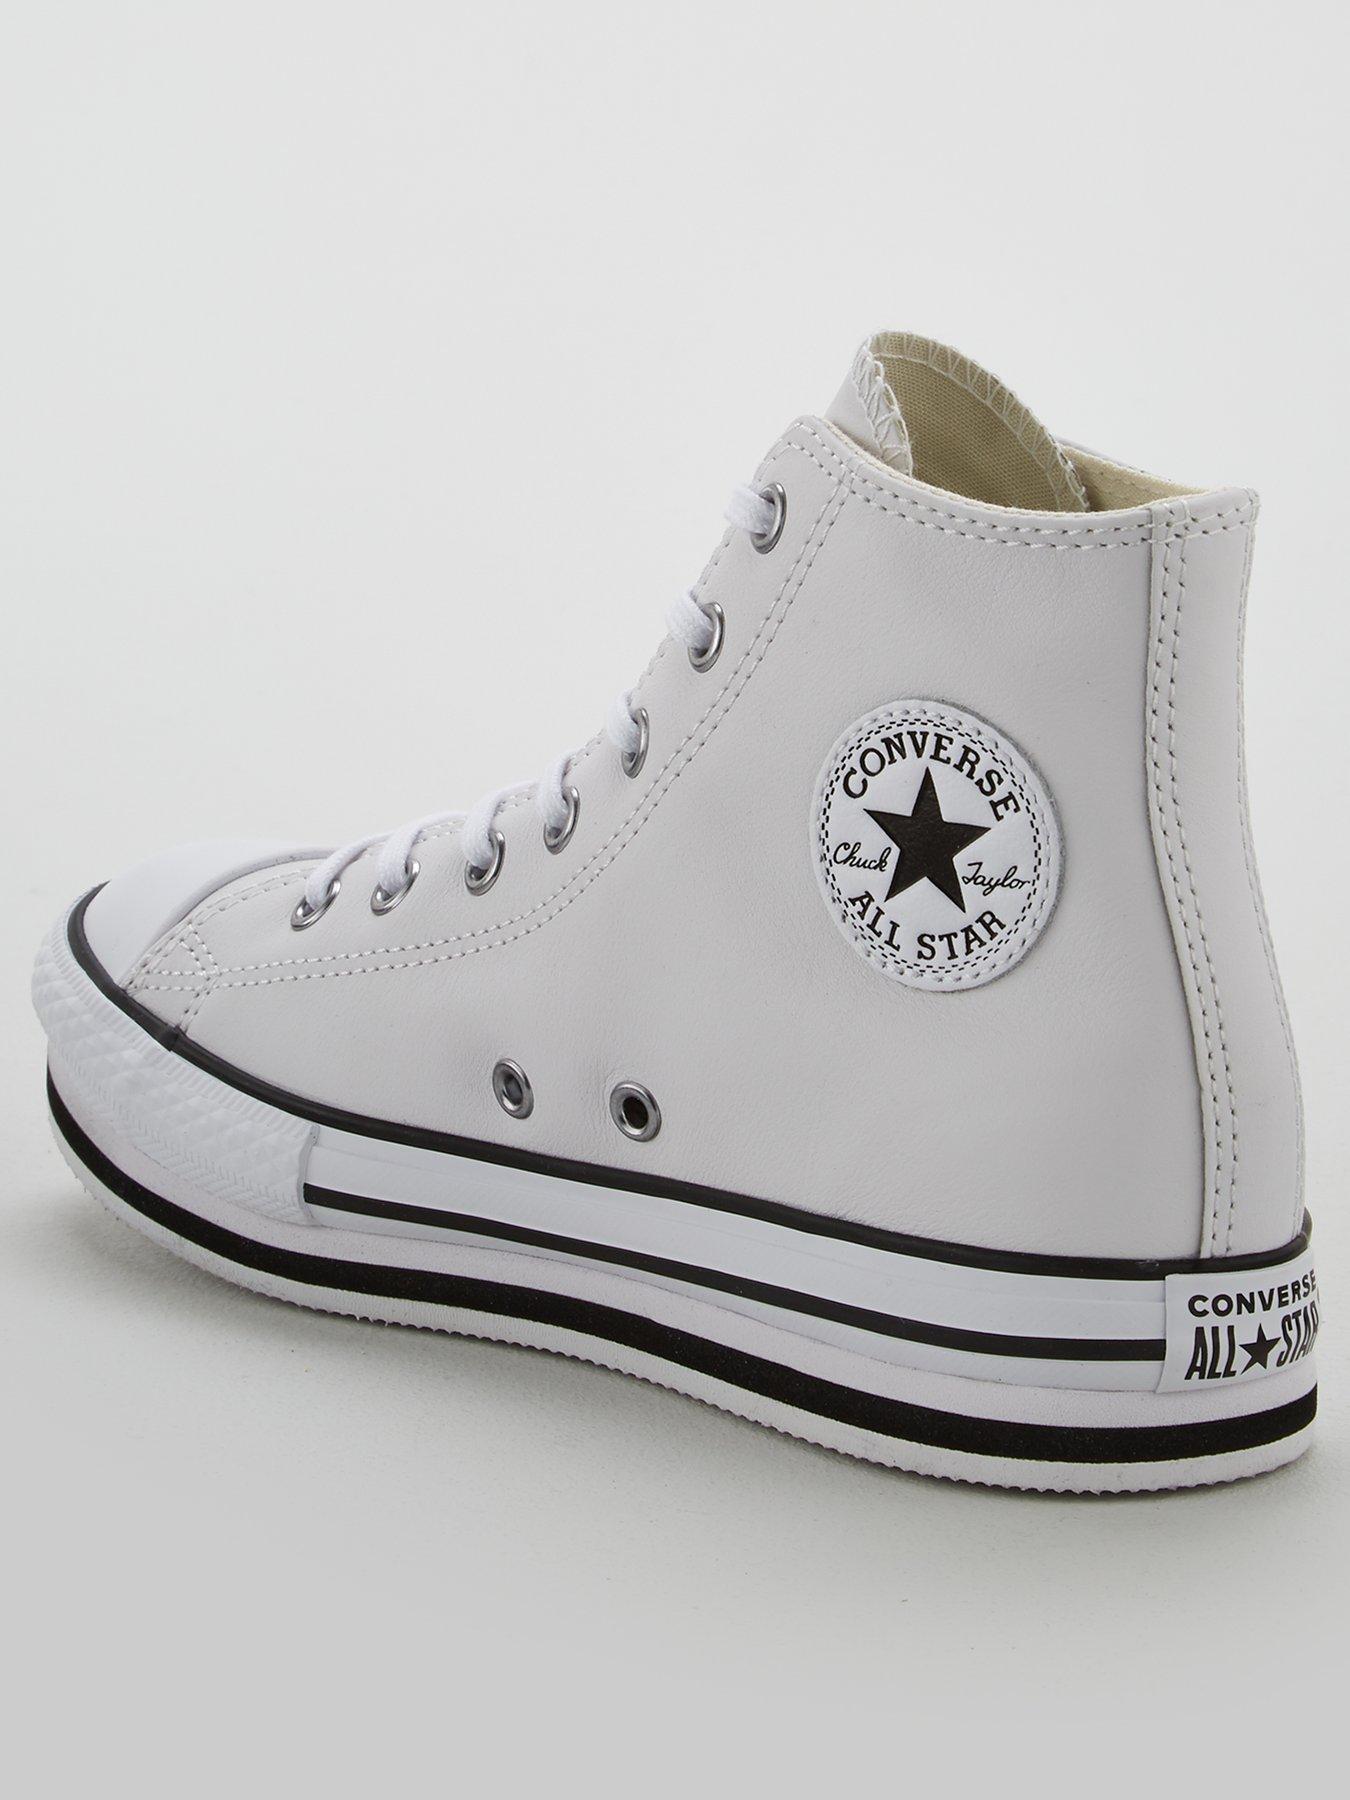 black and white high top converse junior